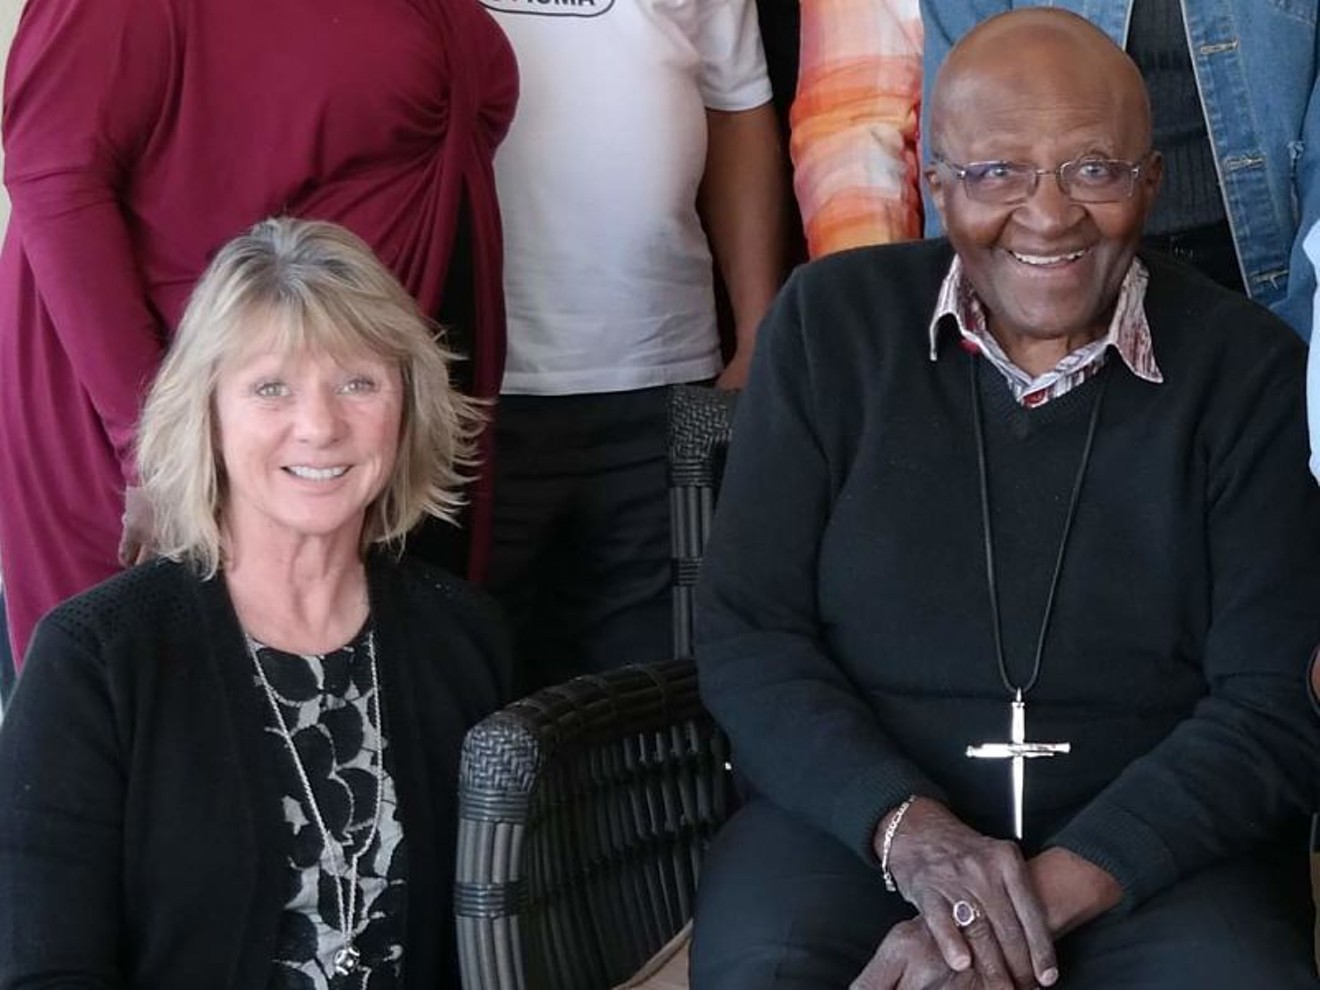 Dawn Gifford Engle with Desmond Tutu, the second Nobel Peace Prize winner to sign on with PeaceJam.